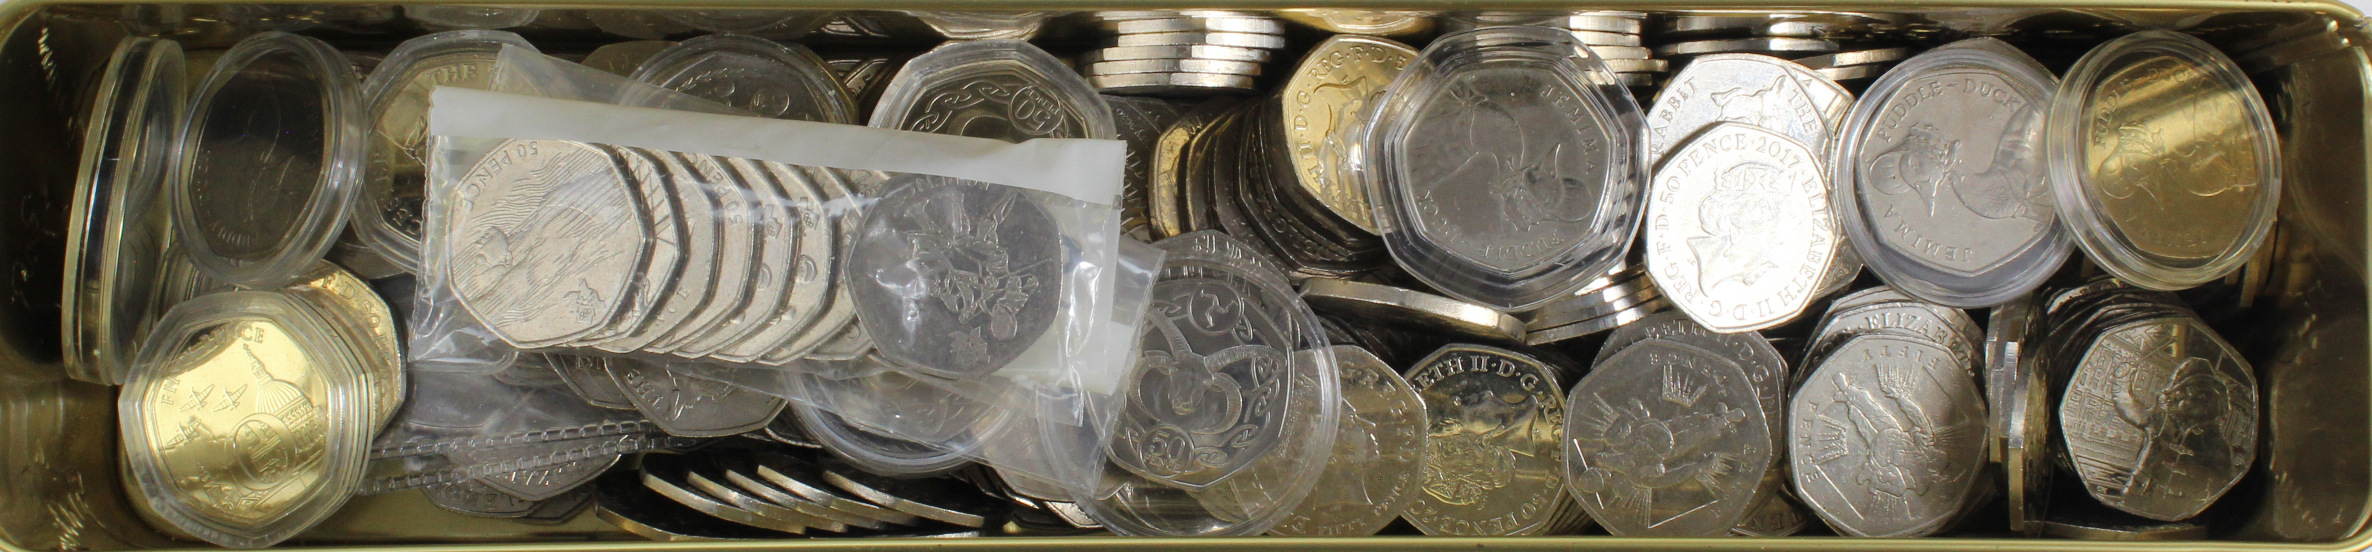 GB & Crown Islands Decimal Commemorative 50p's, £150 face including 11x various London Olympics, and